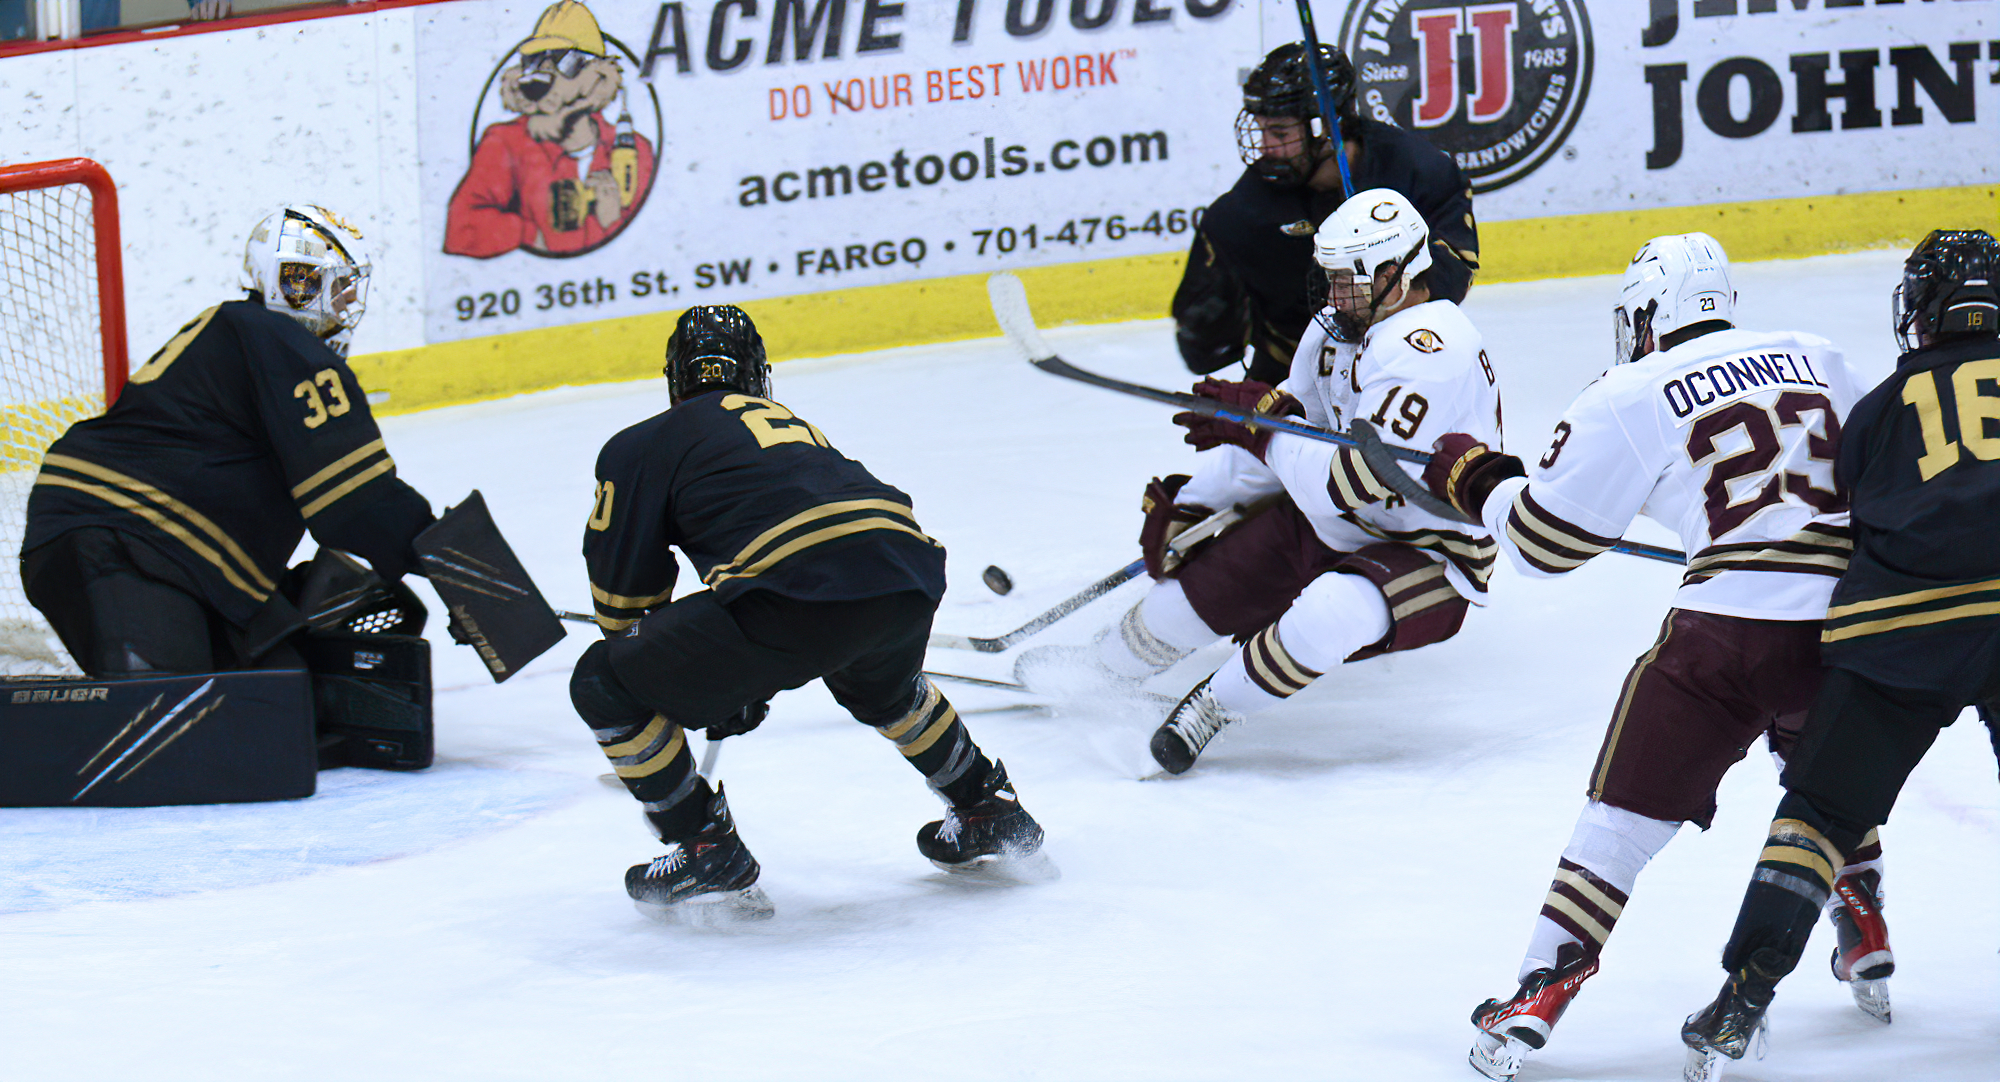 Tyler Bossert is hauled to the ice by a St. Olaf defender during the Cobbers' playoff game. Bossert recorded his 100th career point in the contest.